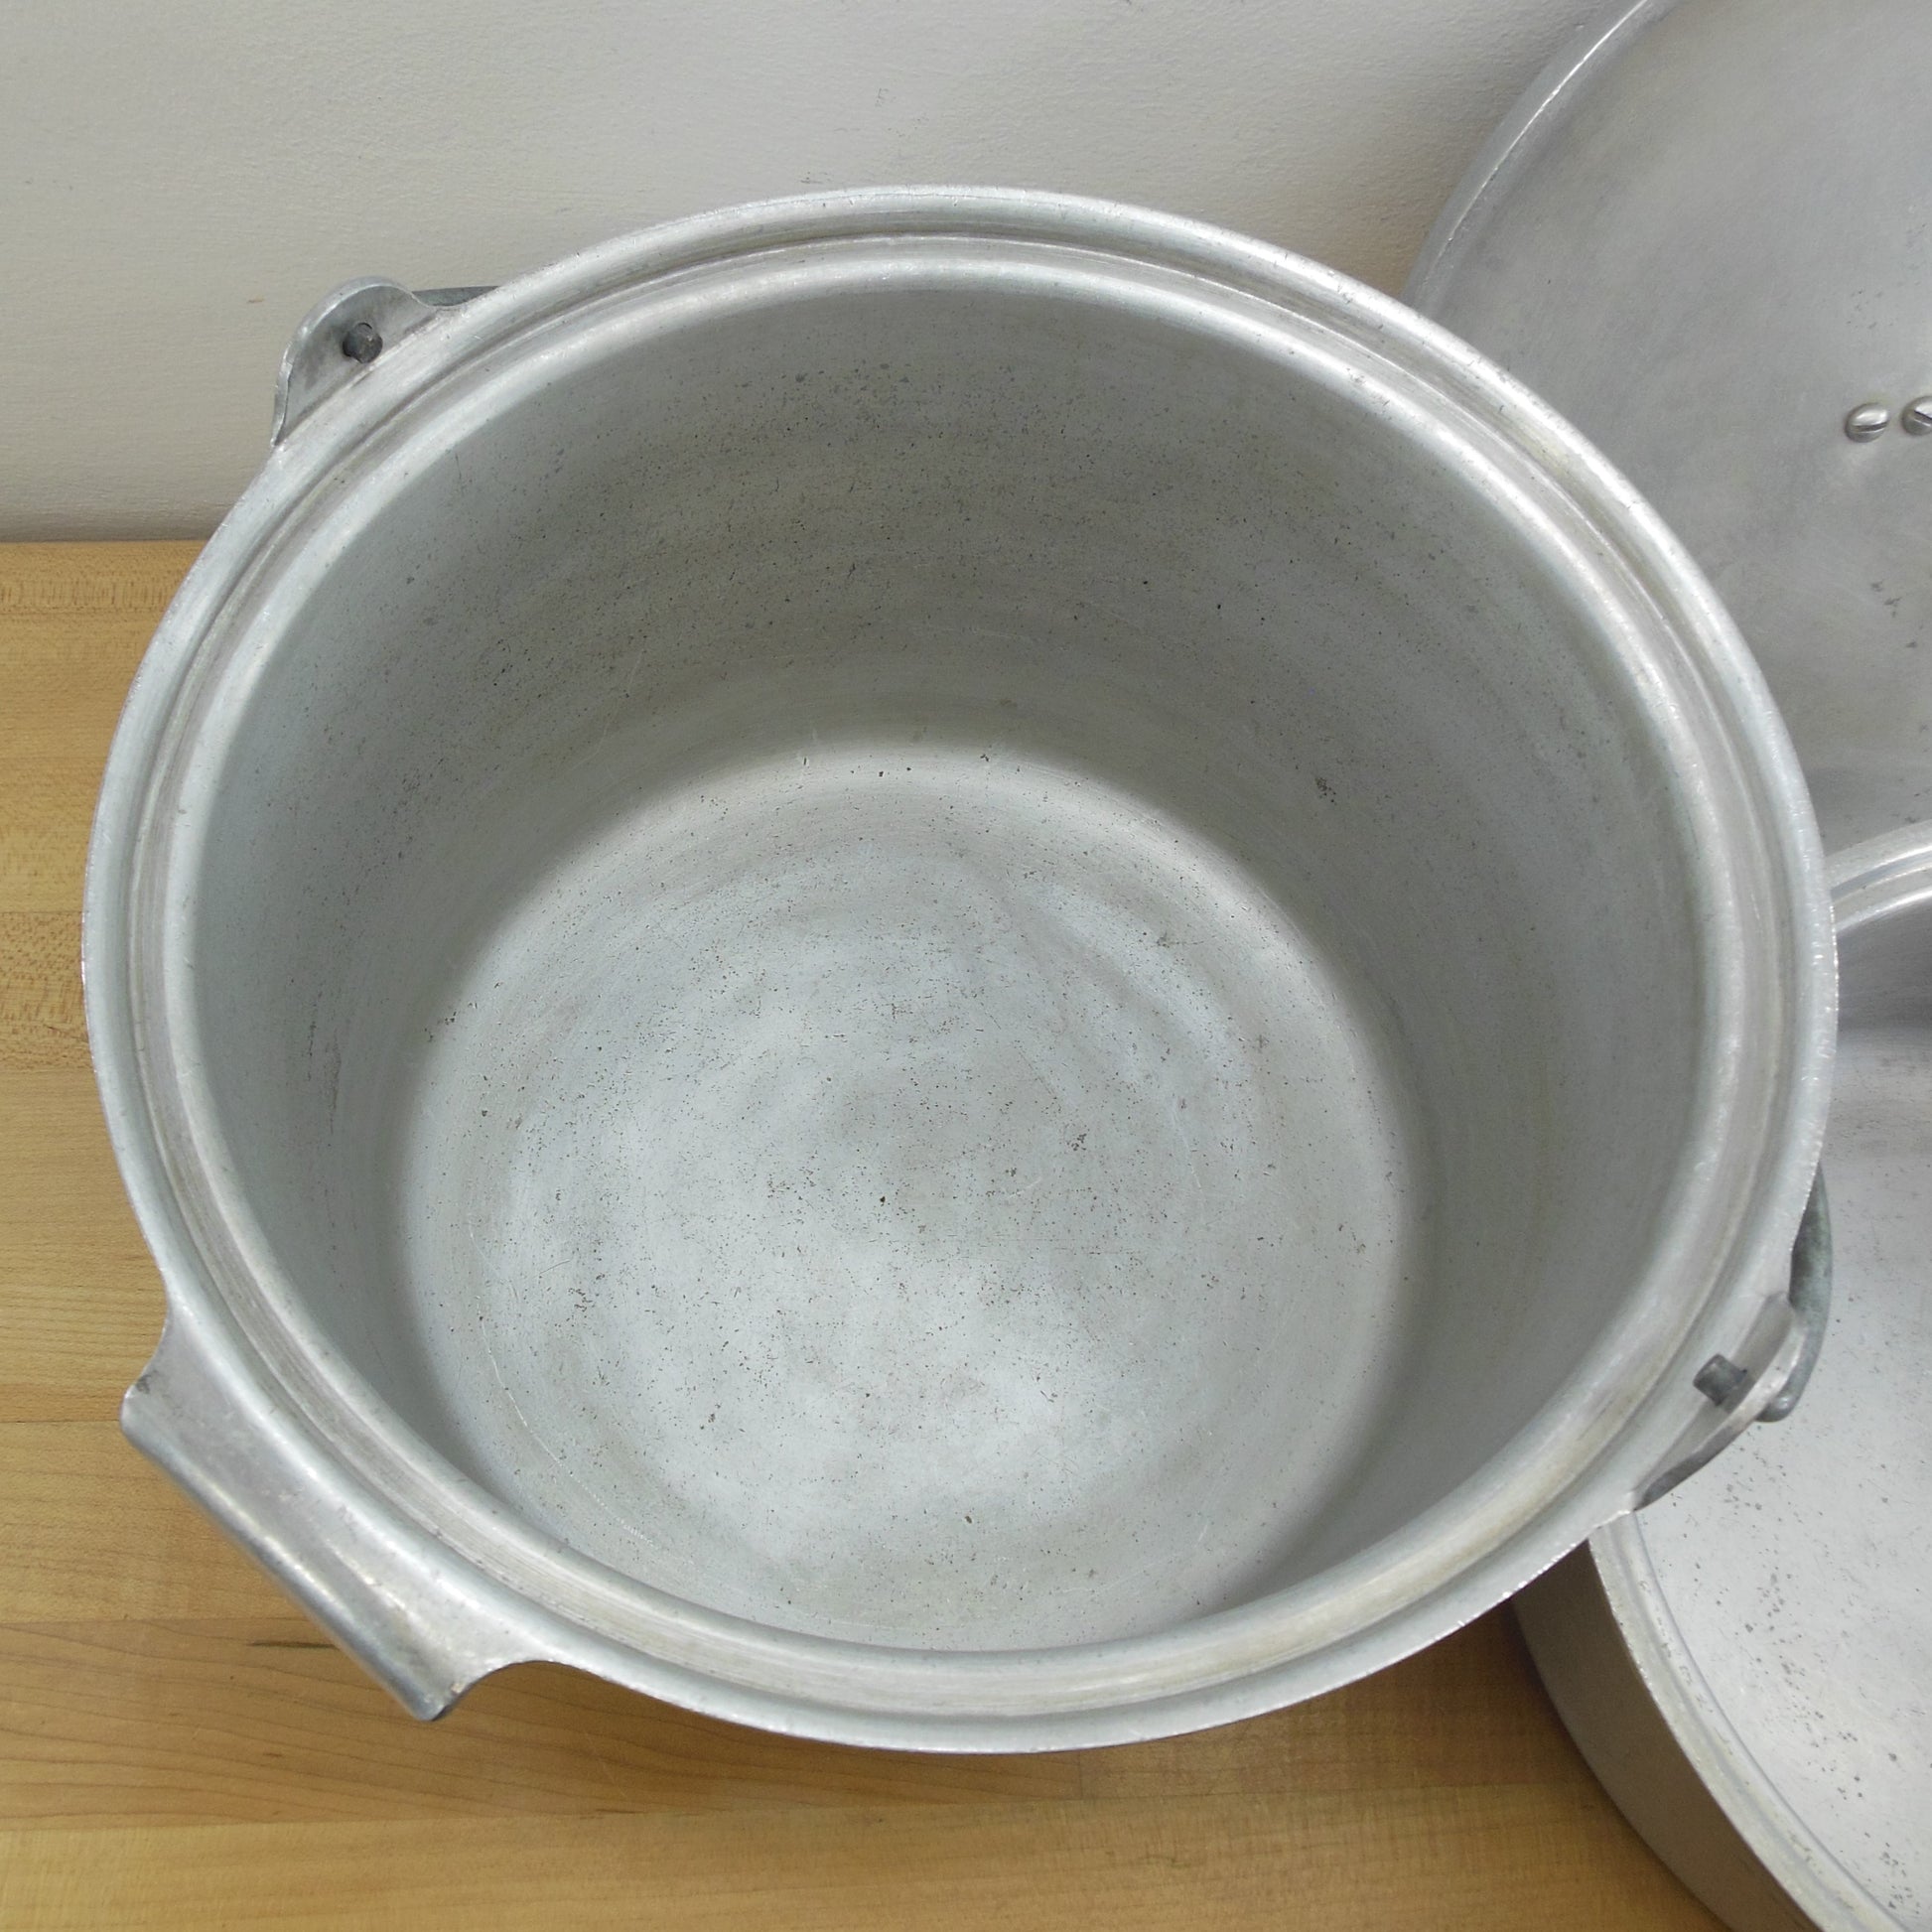 Vintage Kitchen Craft 3 QT Dutch Oven Pot Pan W/ Lid No. 2460 Made in USA  for sale online